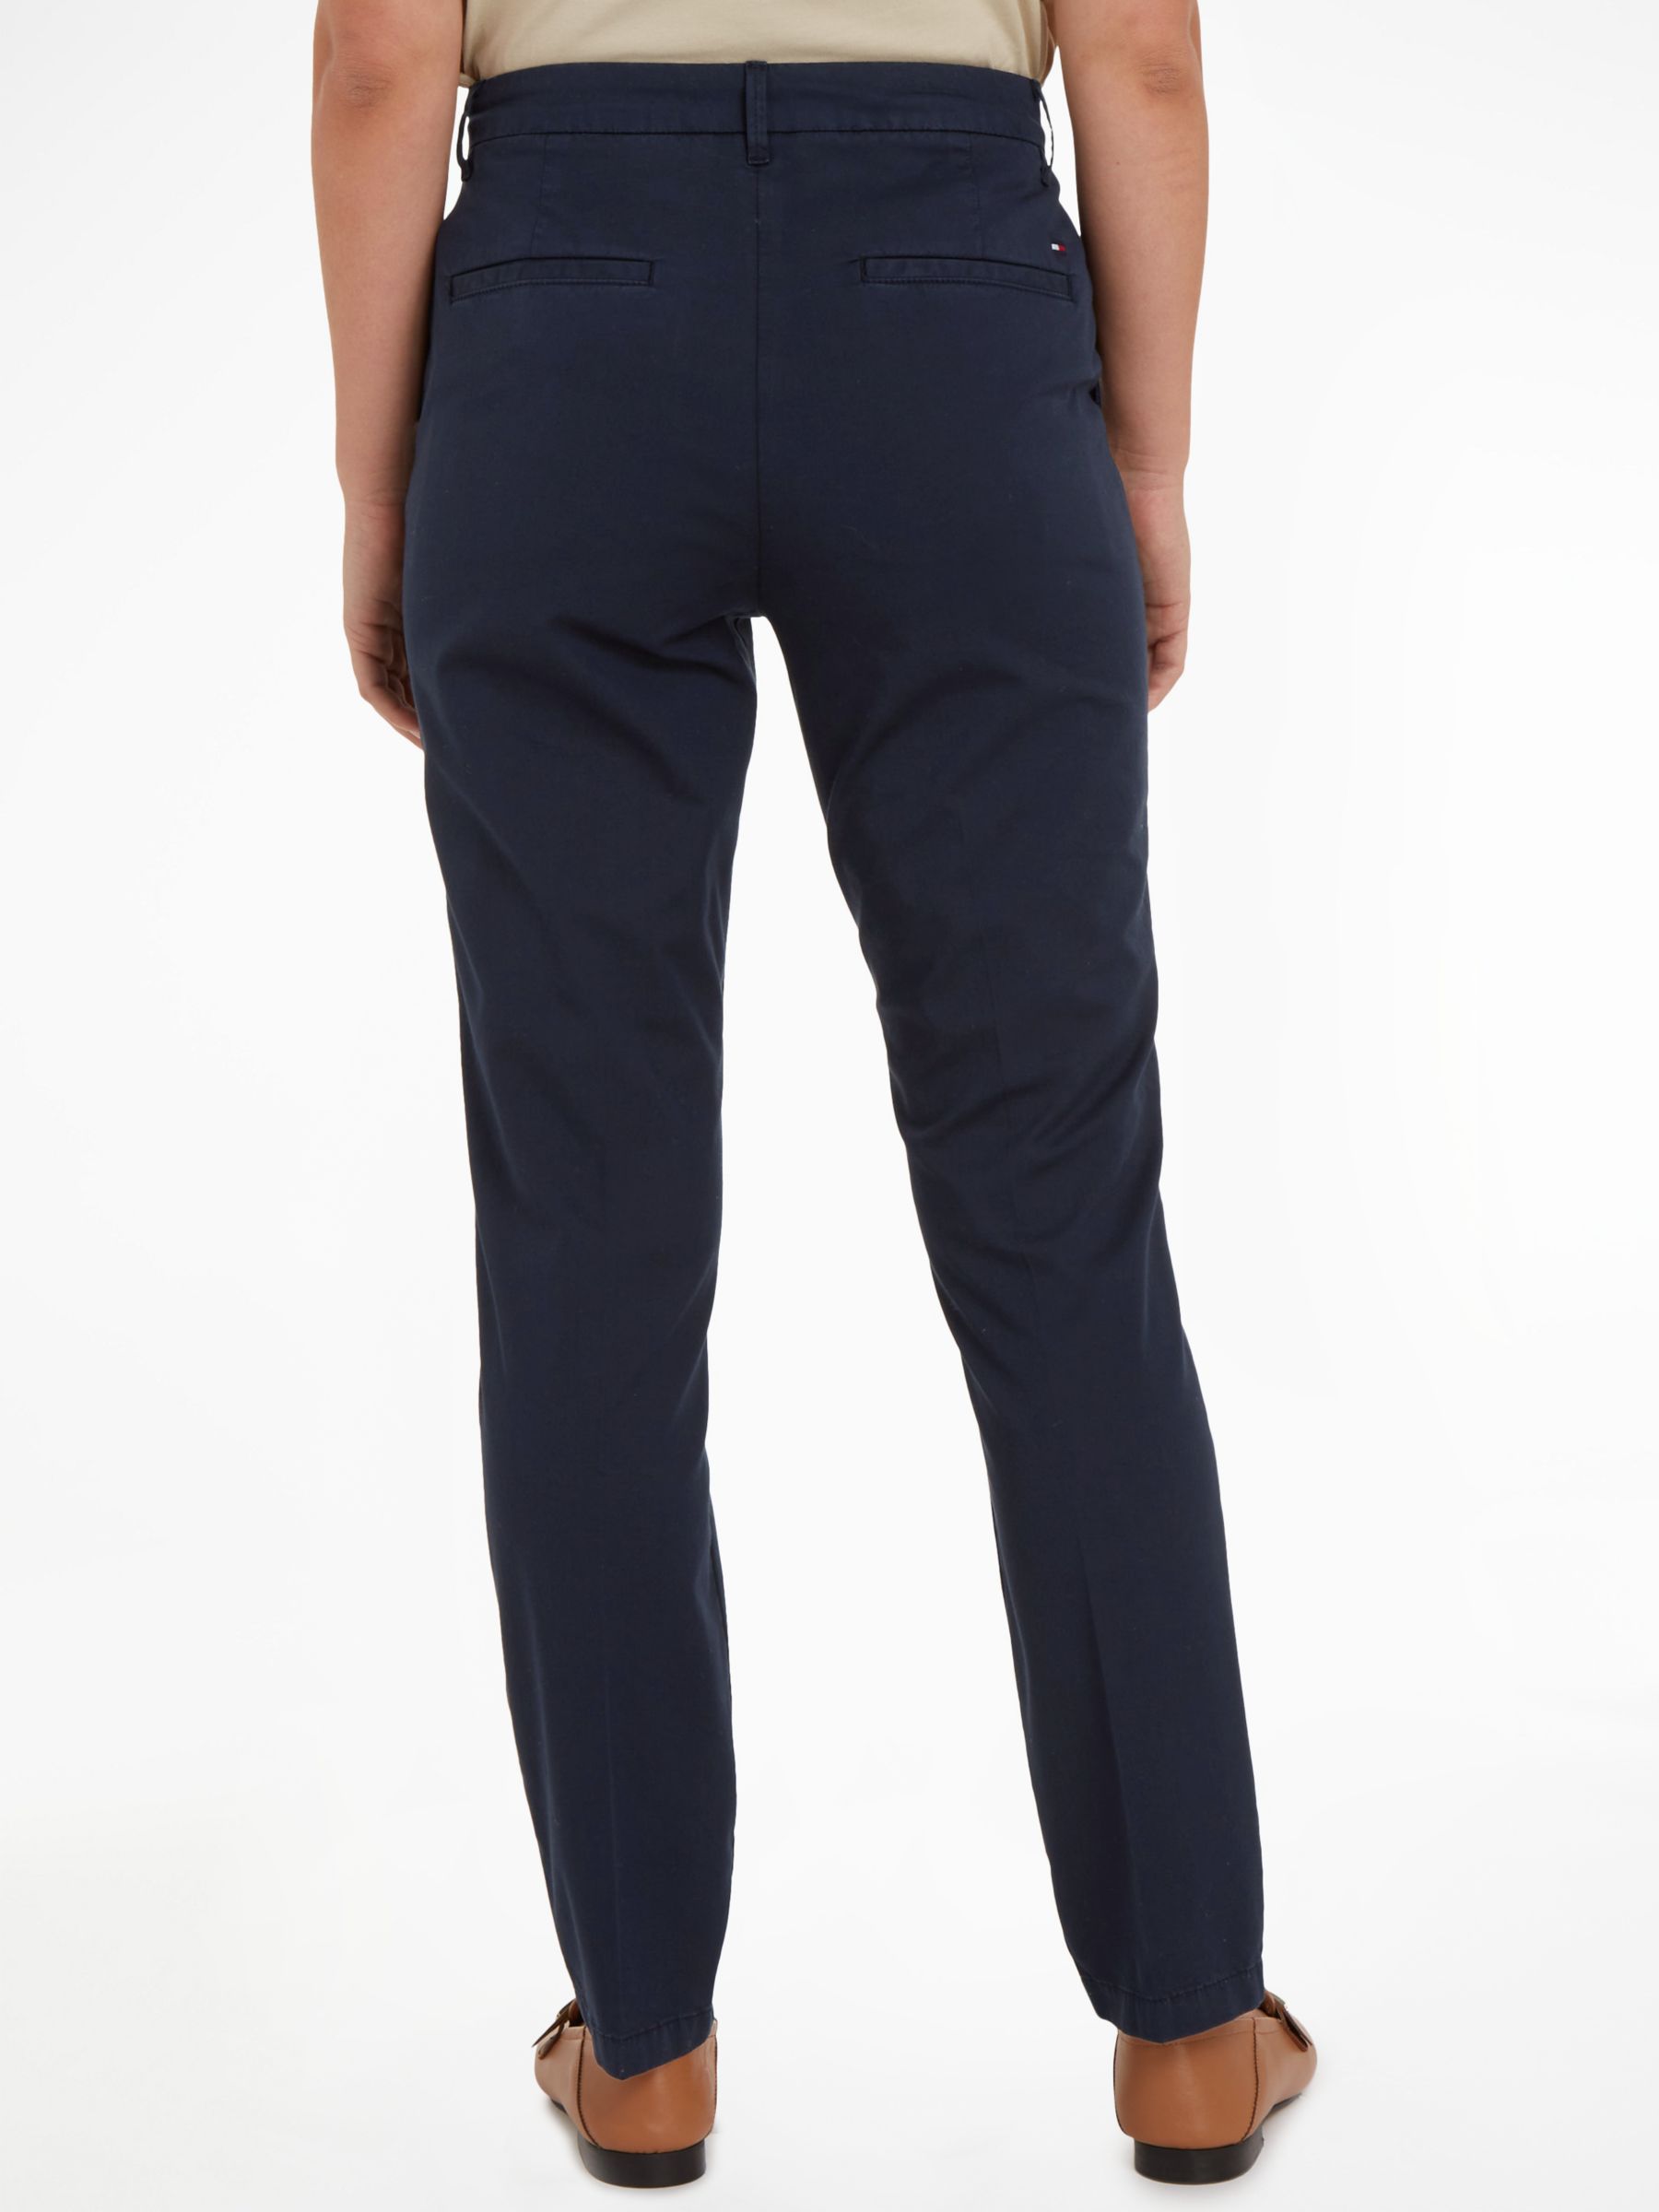 Tommy Hilfiger Slim Chino Trousers, Navy at John Lewis & Partners